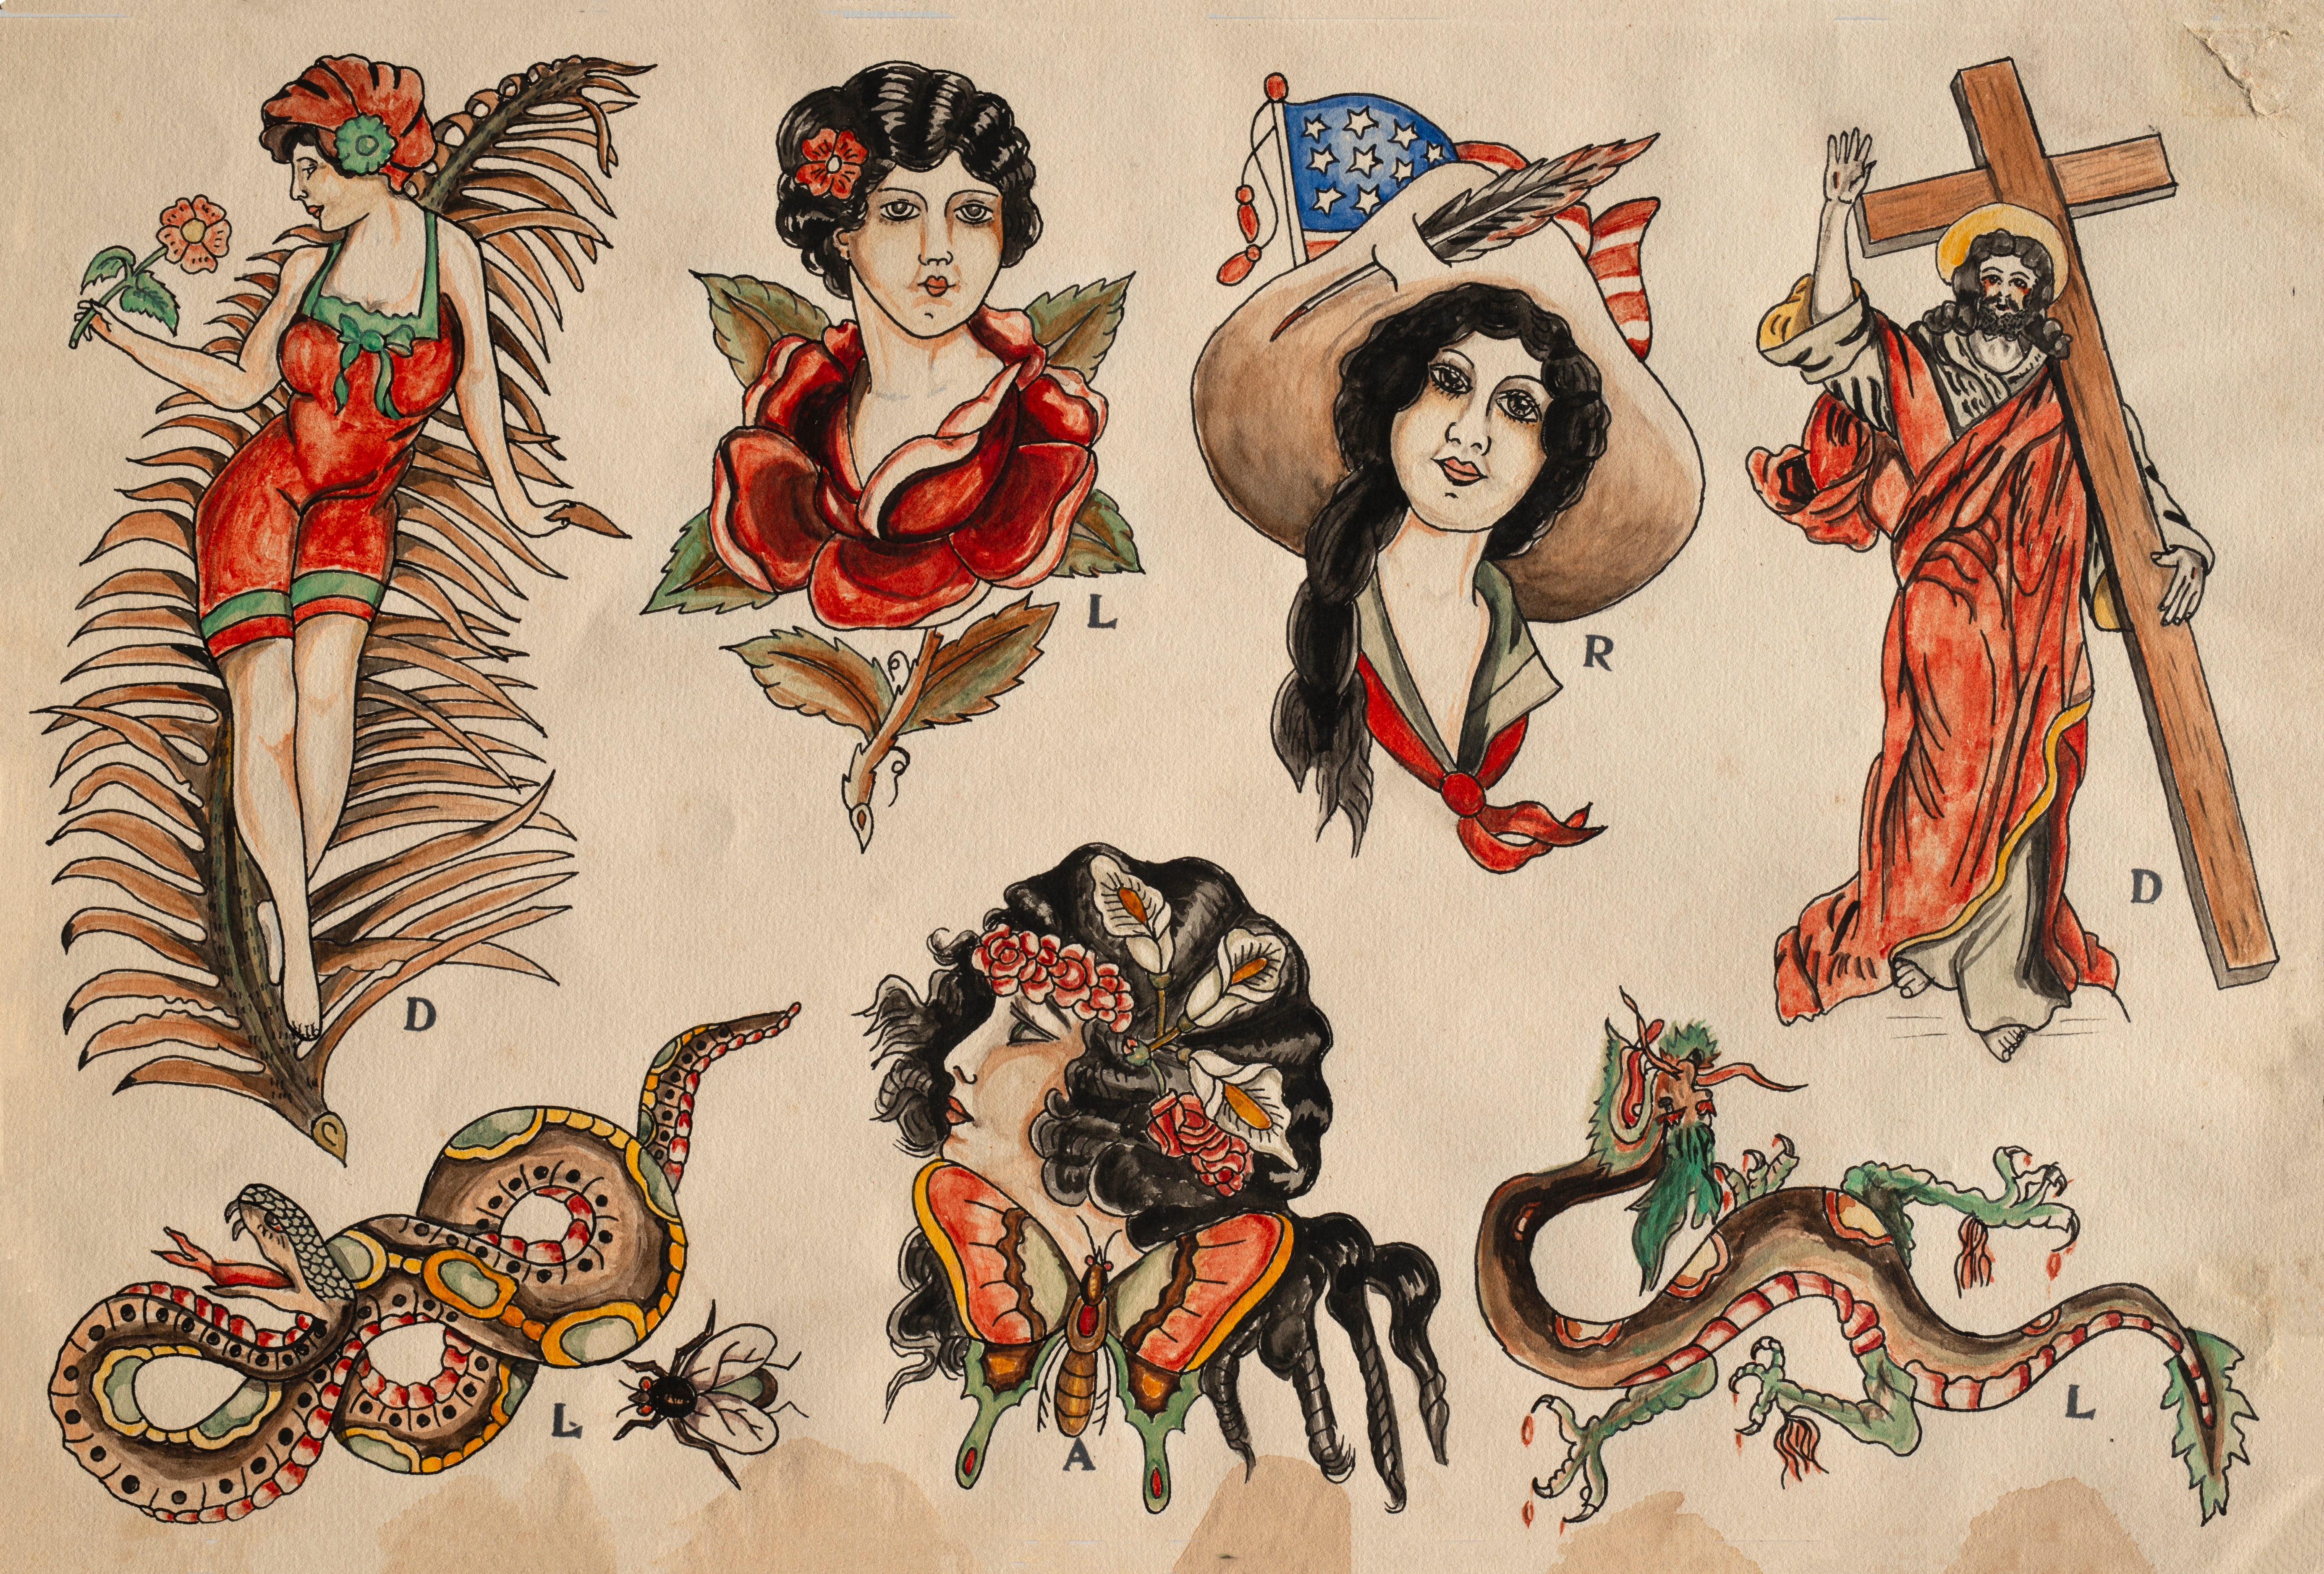 Details more than 66 tattoos from the 1920s  thtantai2